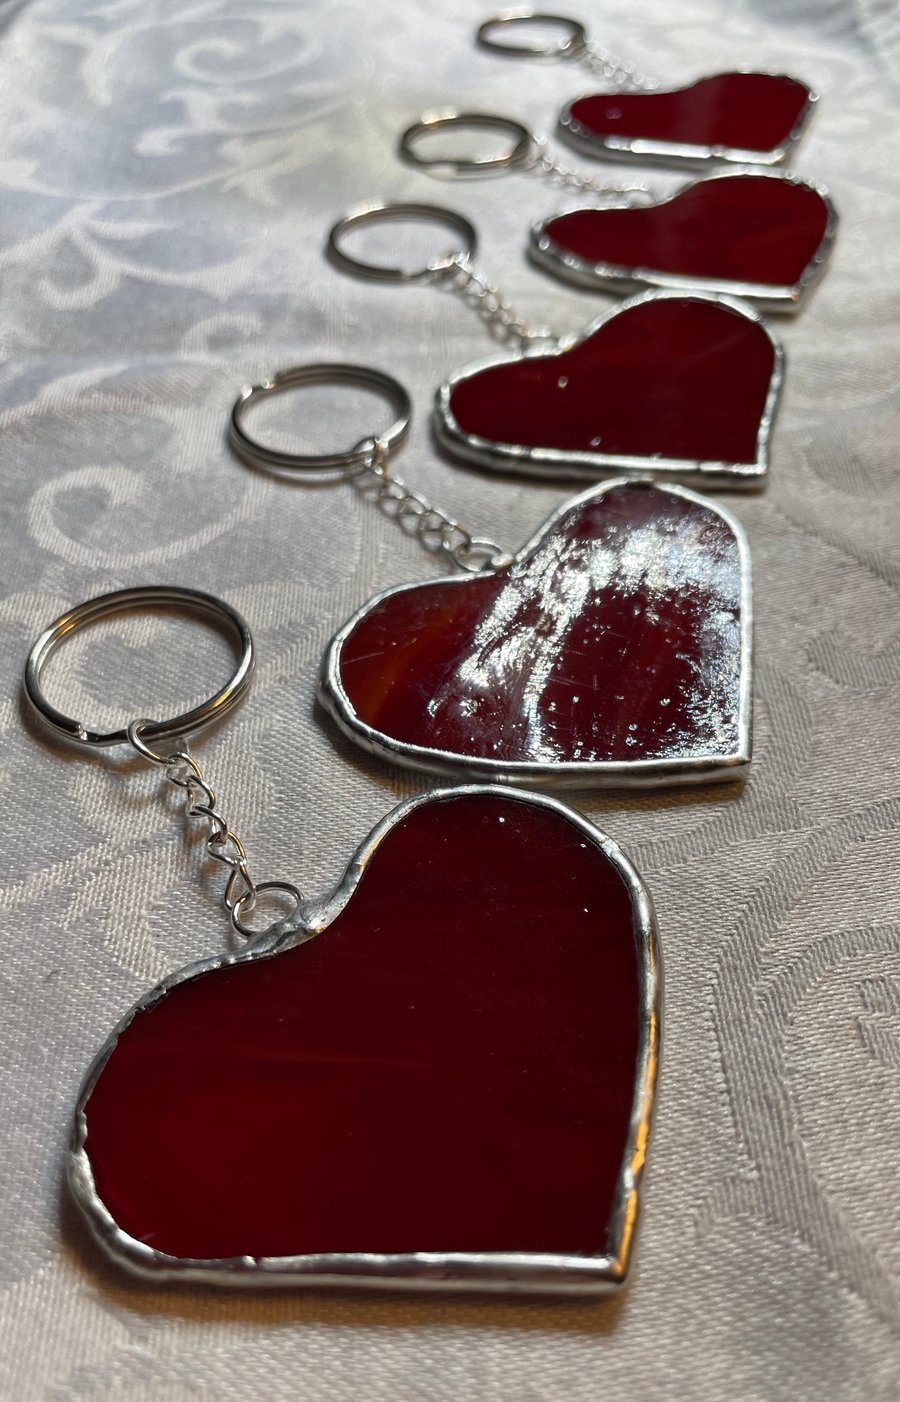 Stained glass love heart keyring or bag charm